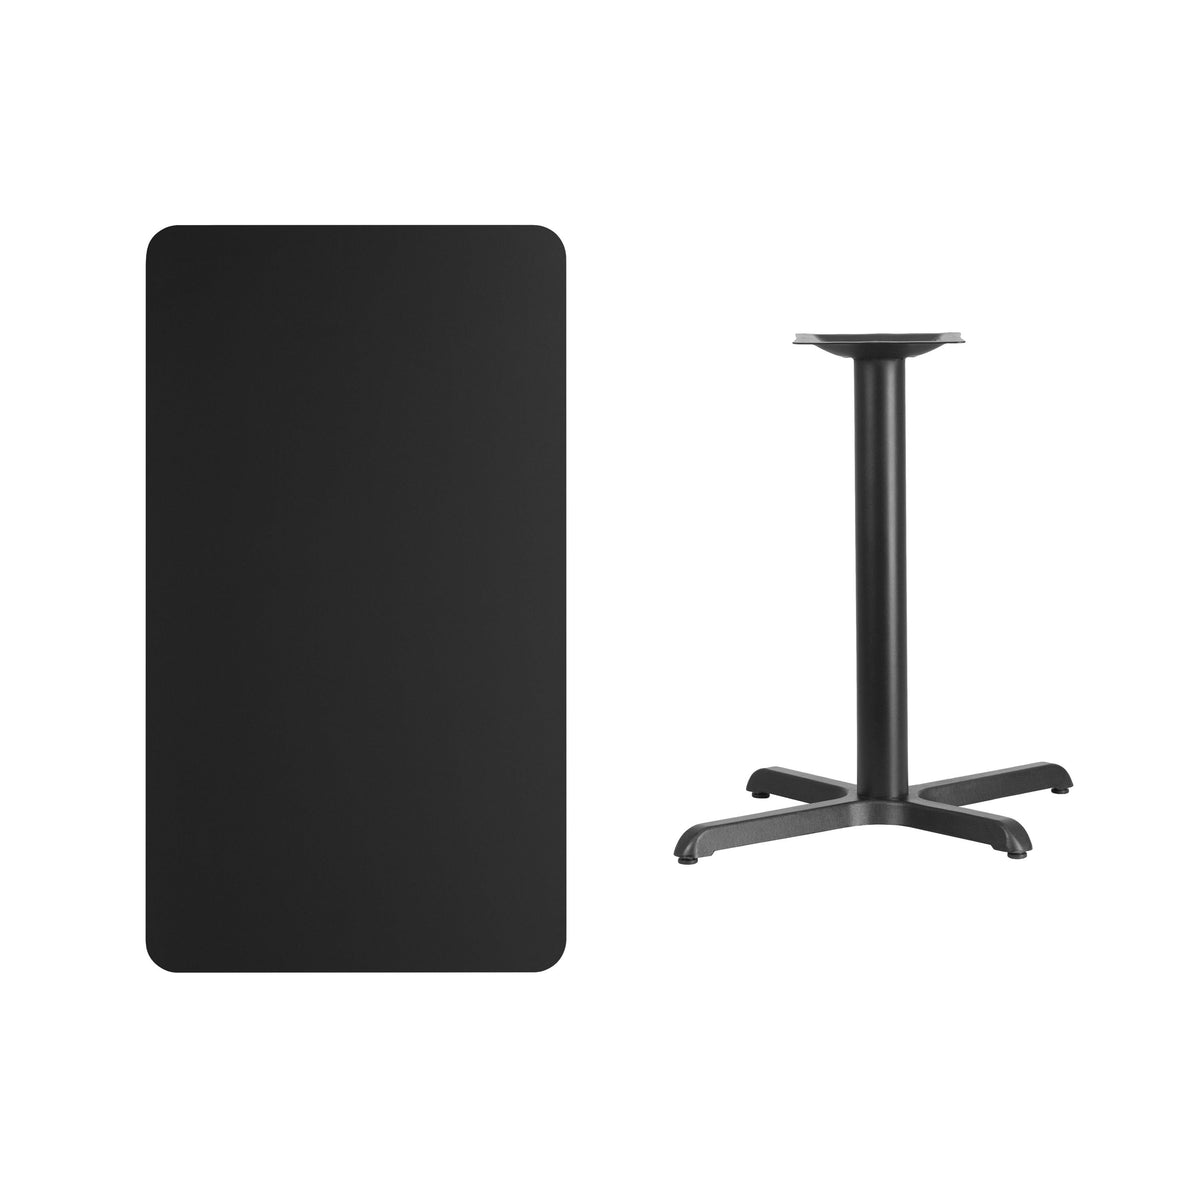 Black |#| 24inch x 42inch Rectangular Laminate Table Top with 23.5inch x 29.5inch Table Height Base